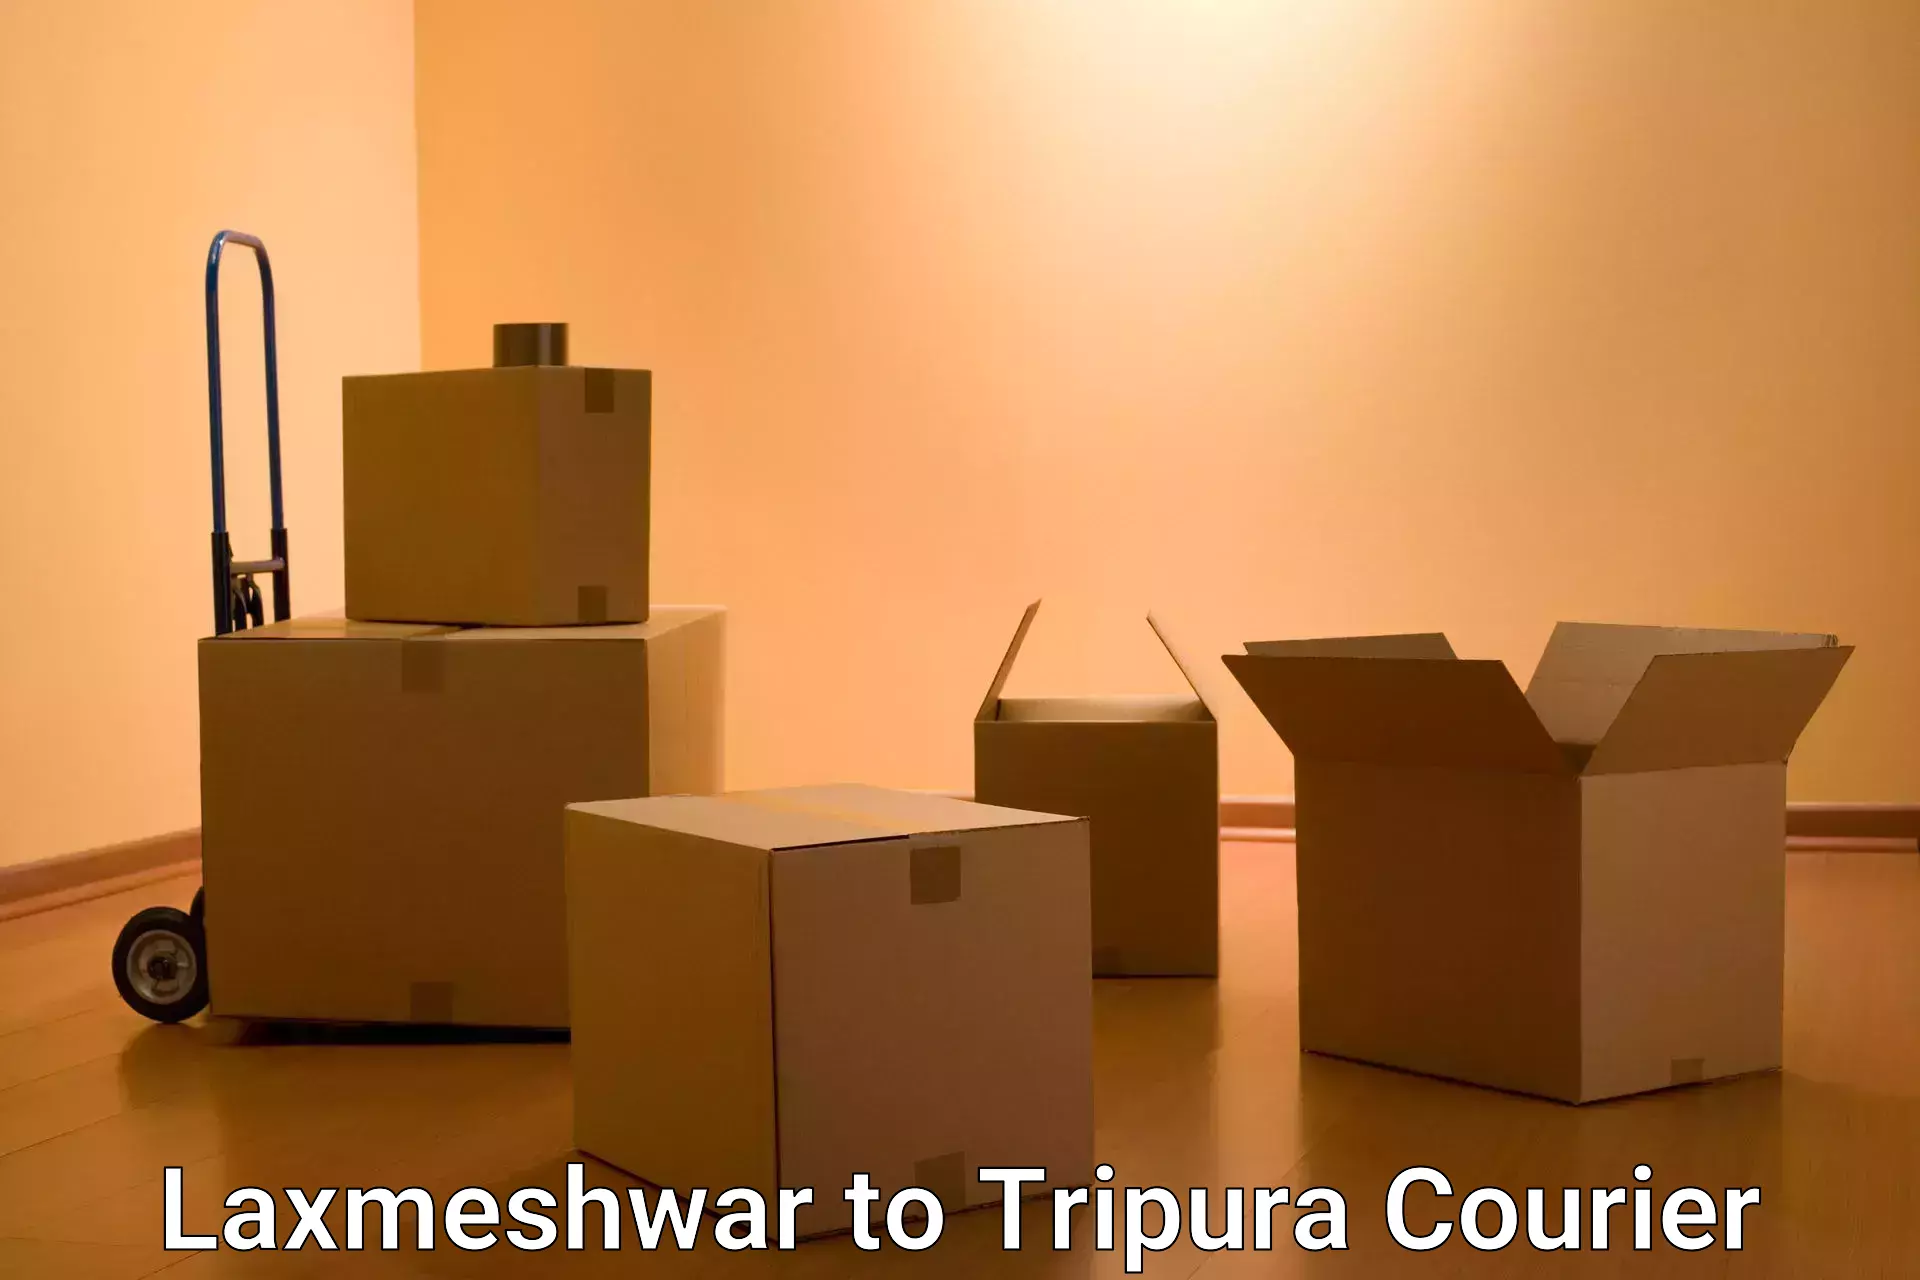 On-call courier service Laxmeshwar to Udaipur Tripura